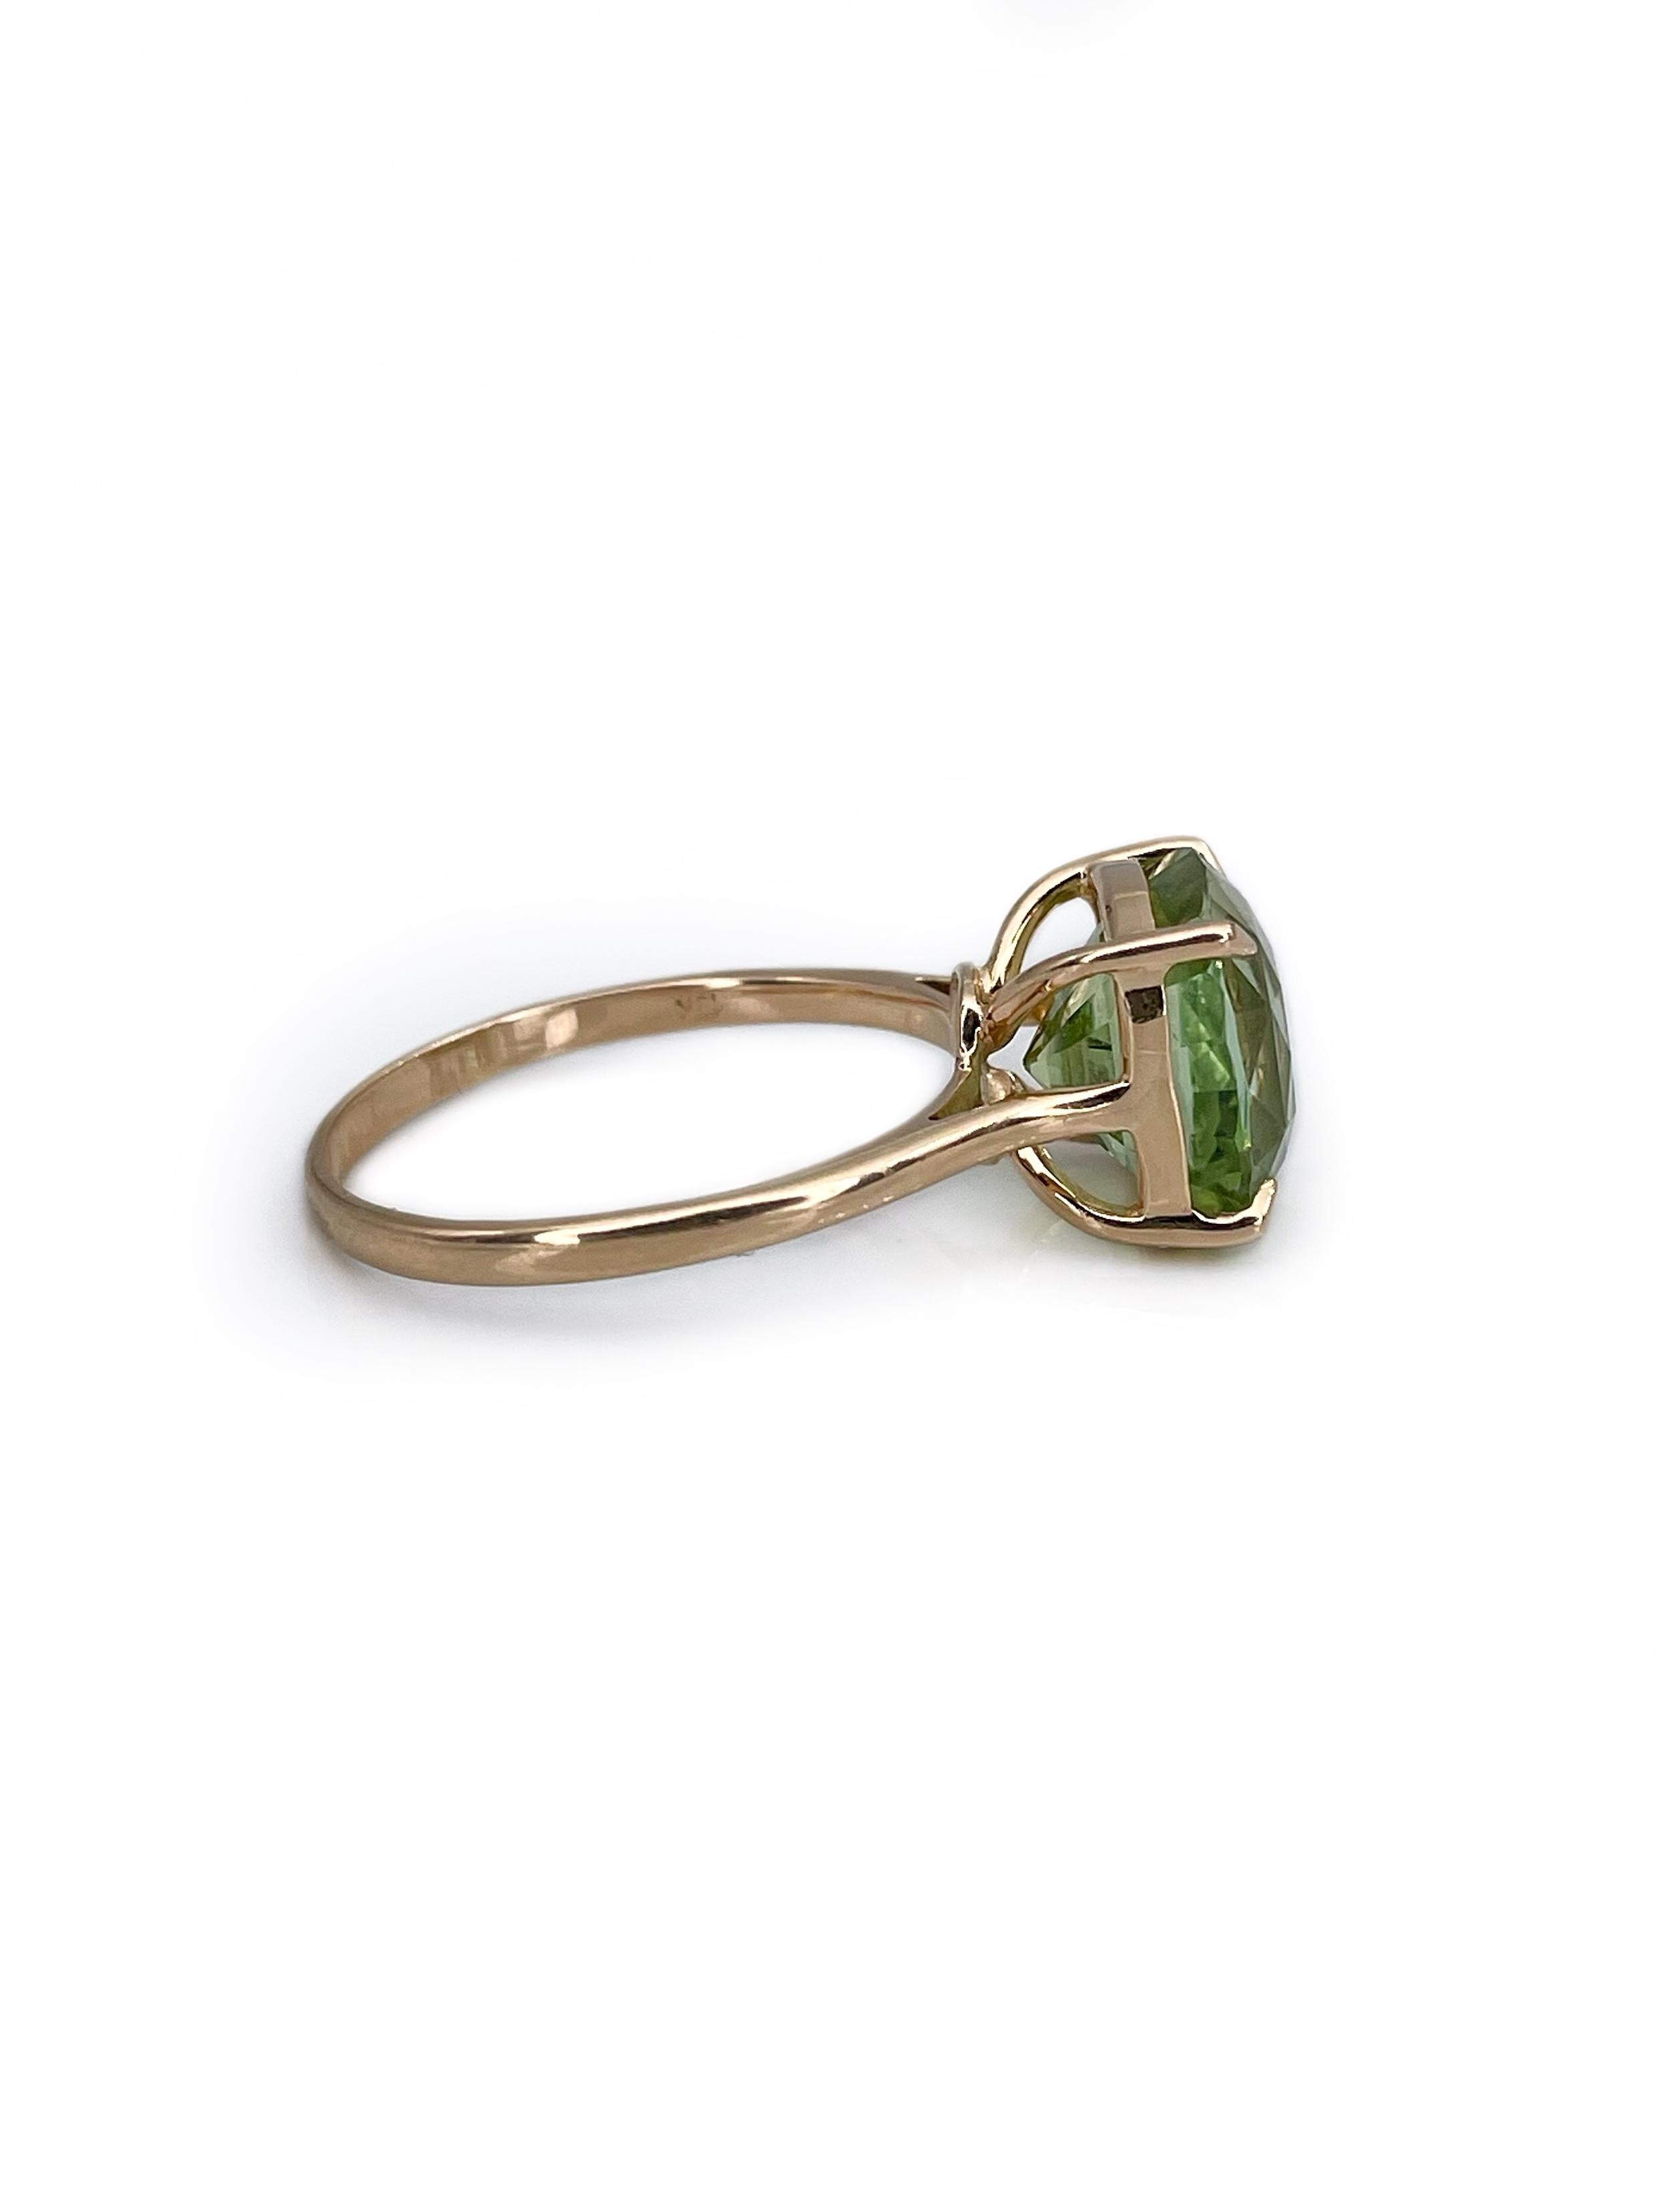 This is a modern cocktail ring crafted in 18K gold. The piece features rectangle beautiful light green tourmaline. 

Weight: 3.54g
Size: 17.5 (US 7.25)

IMPORTANT: please ask about the possibility to resize before purchase. This process takes 2-7